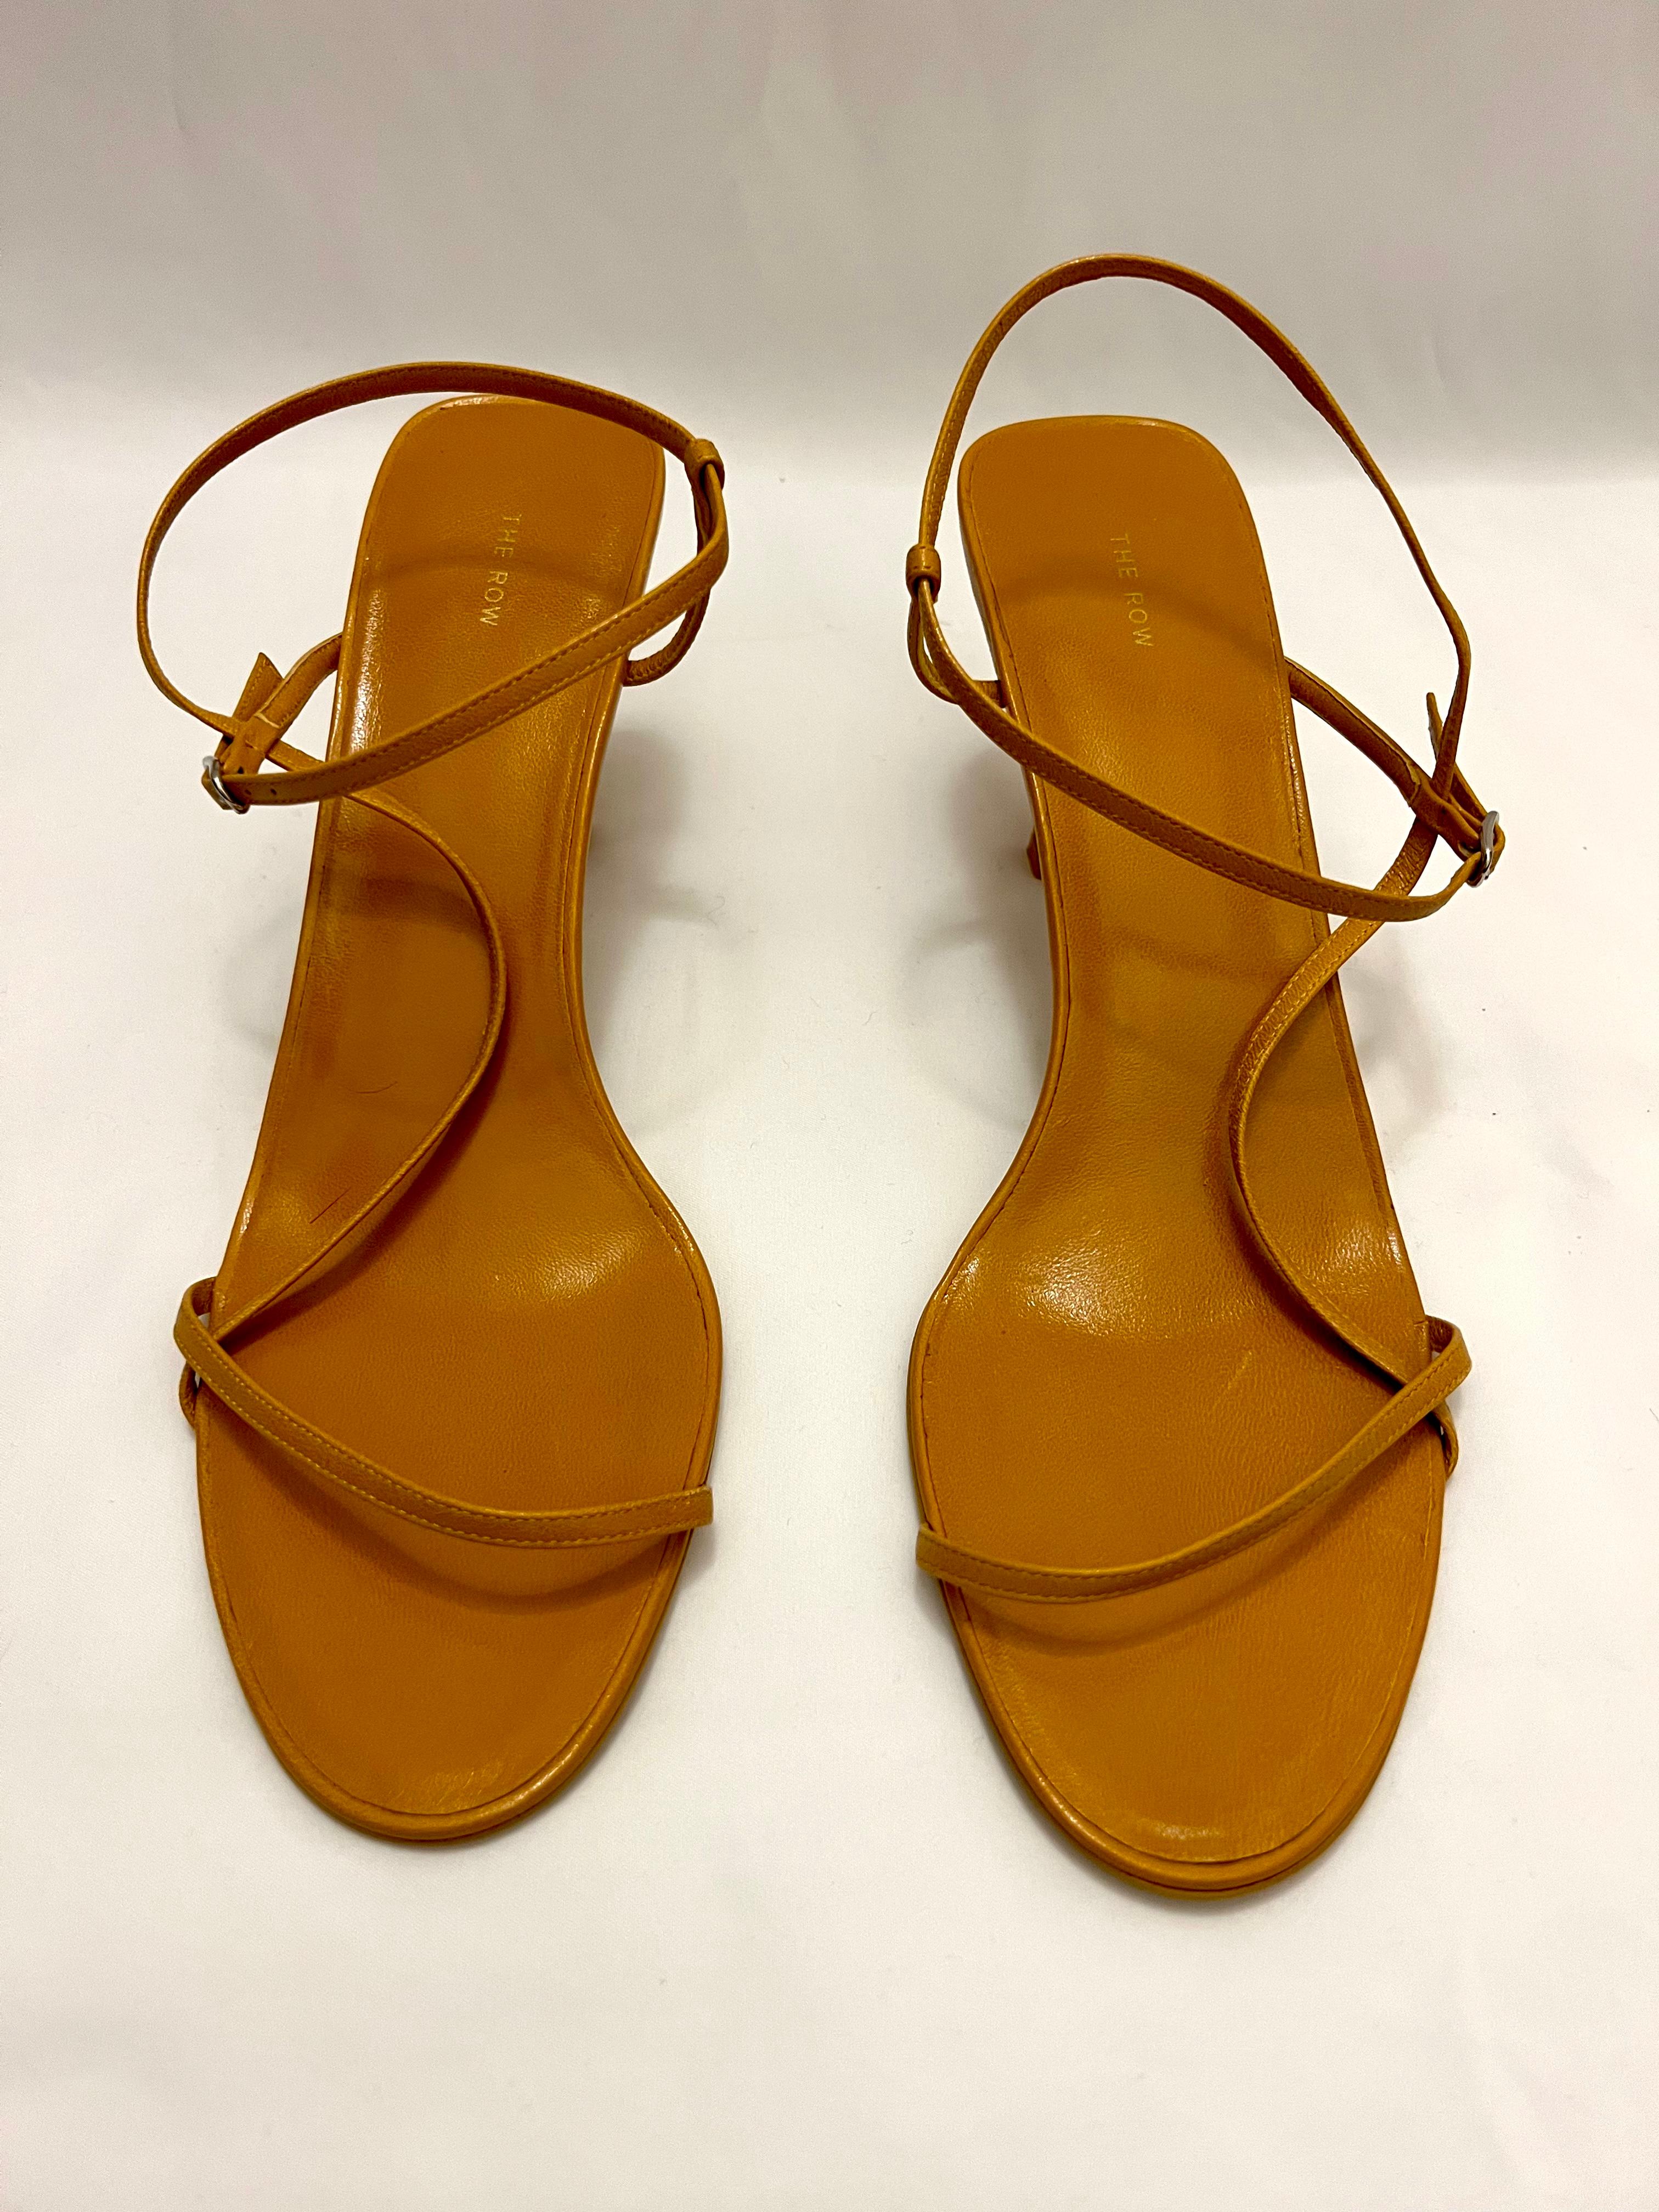 The sandals are made out of yellow mustard leather. They feature thin straps and asymmetrical design with adjustable ankle strap and 2.5” block heel. The shoes are brand new. Est. Retail is $790.